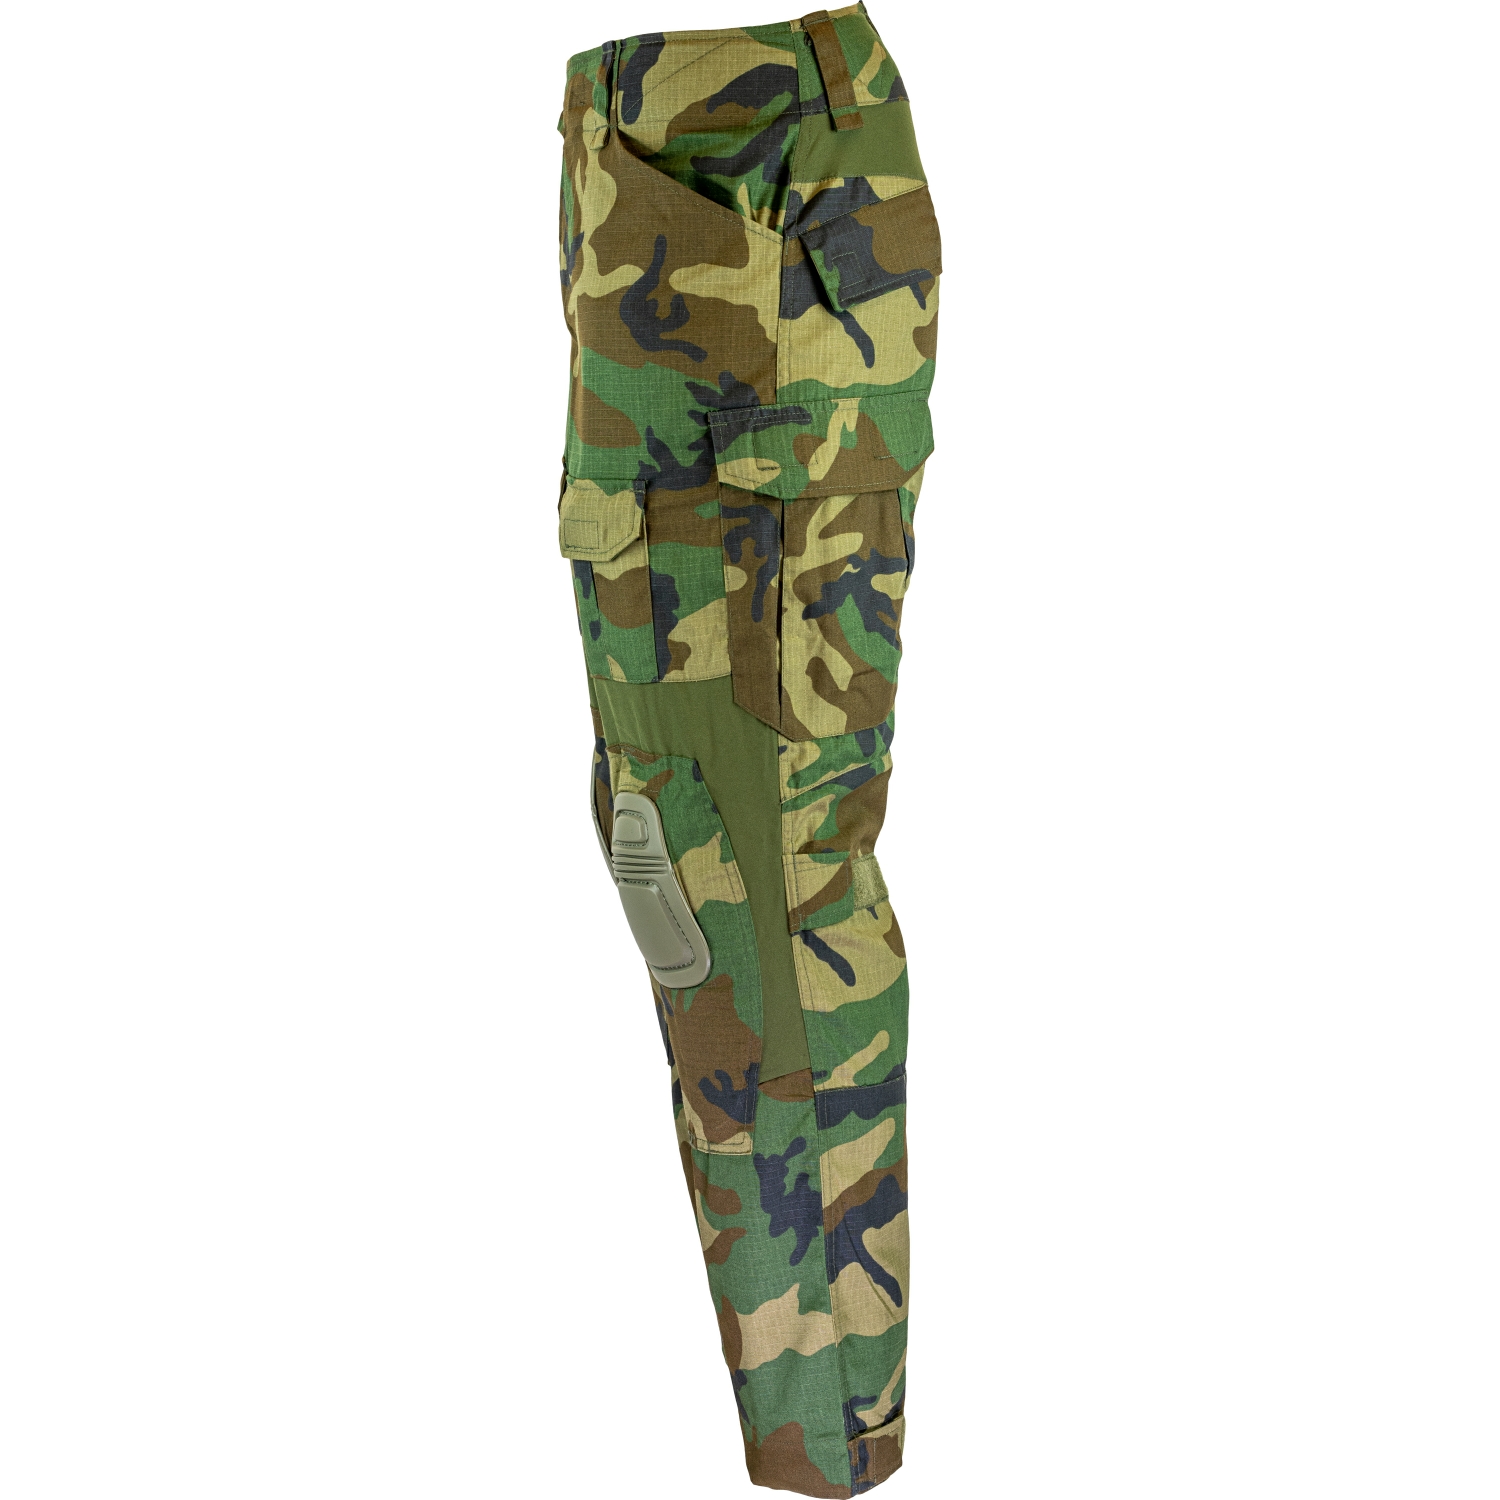 VIPER TACTICAL MILITARY COMBAT BDU TROUSERS POLYCOTTON RIPSTOP MENS PANTS COYOTE